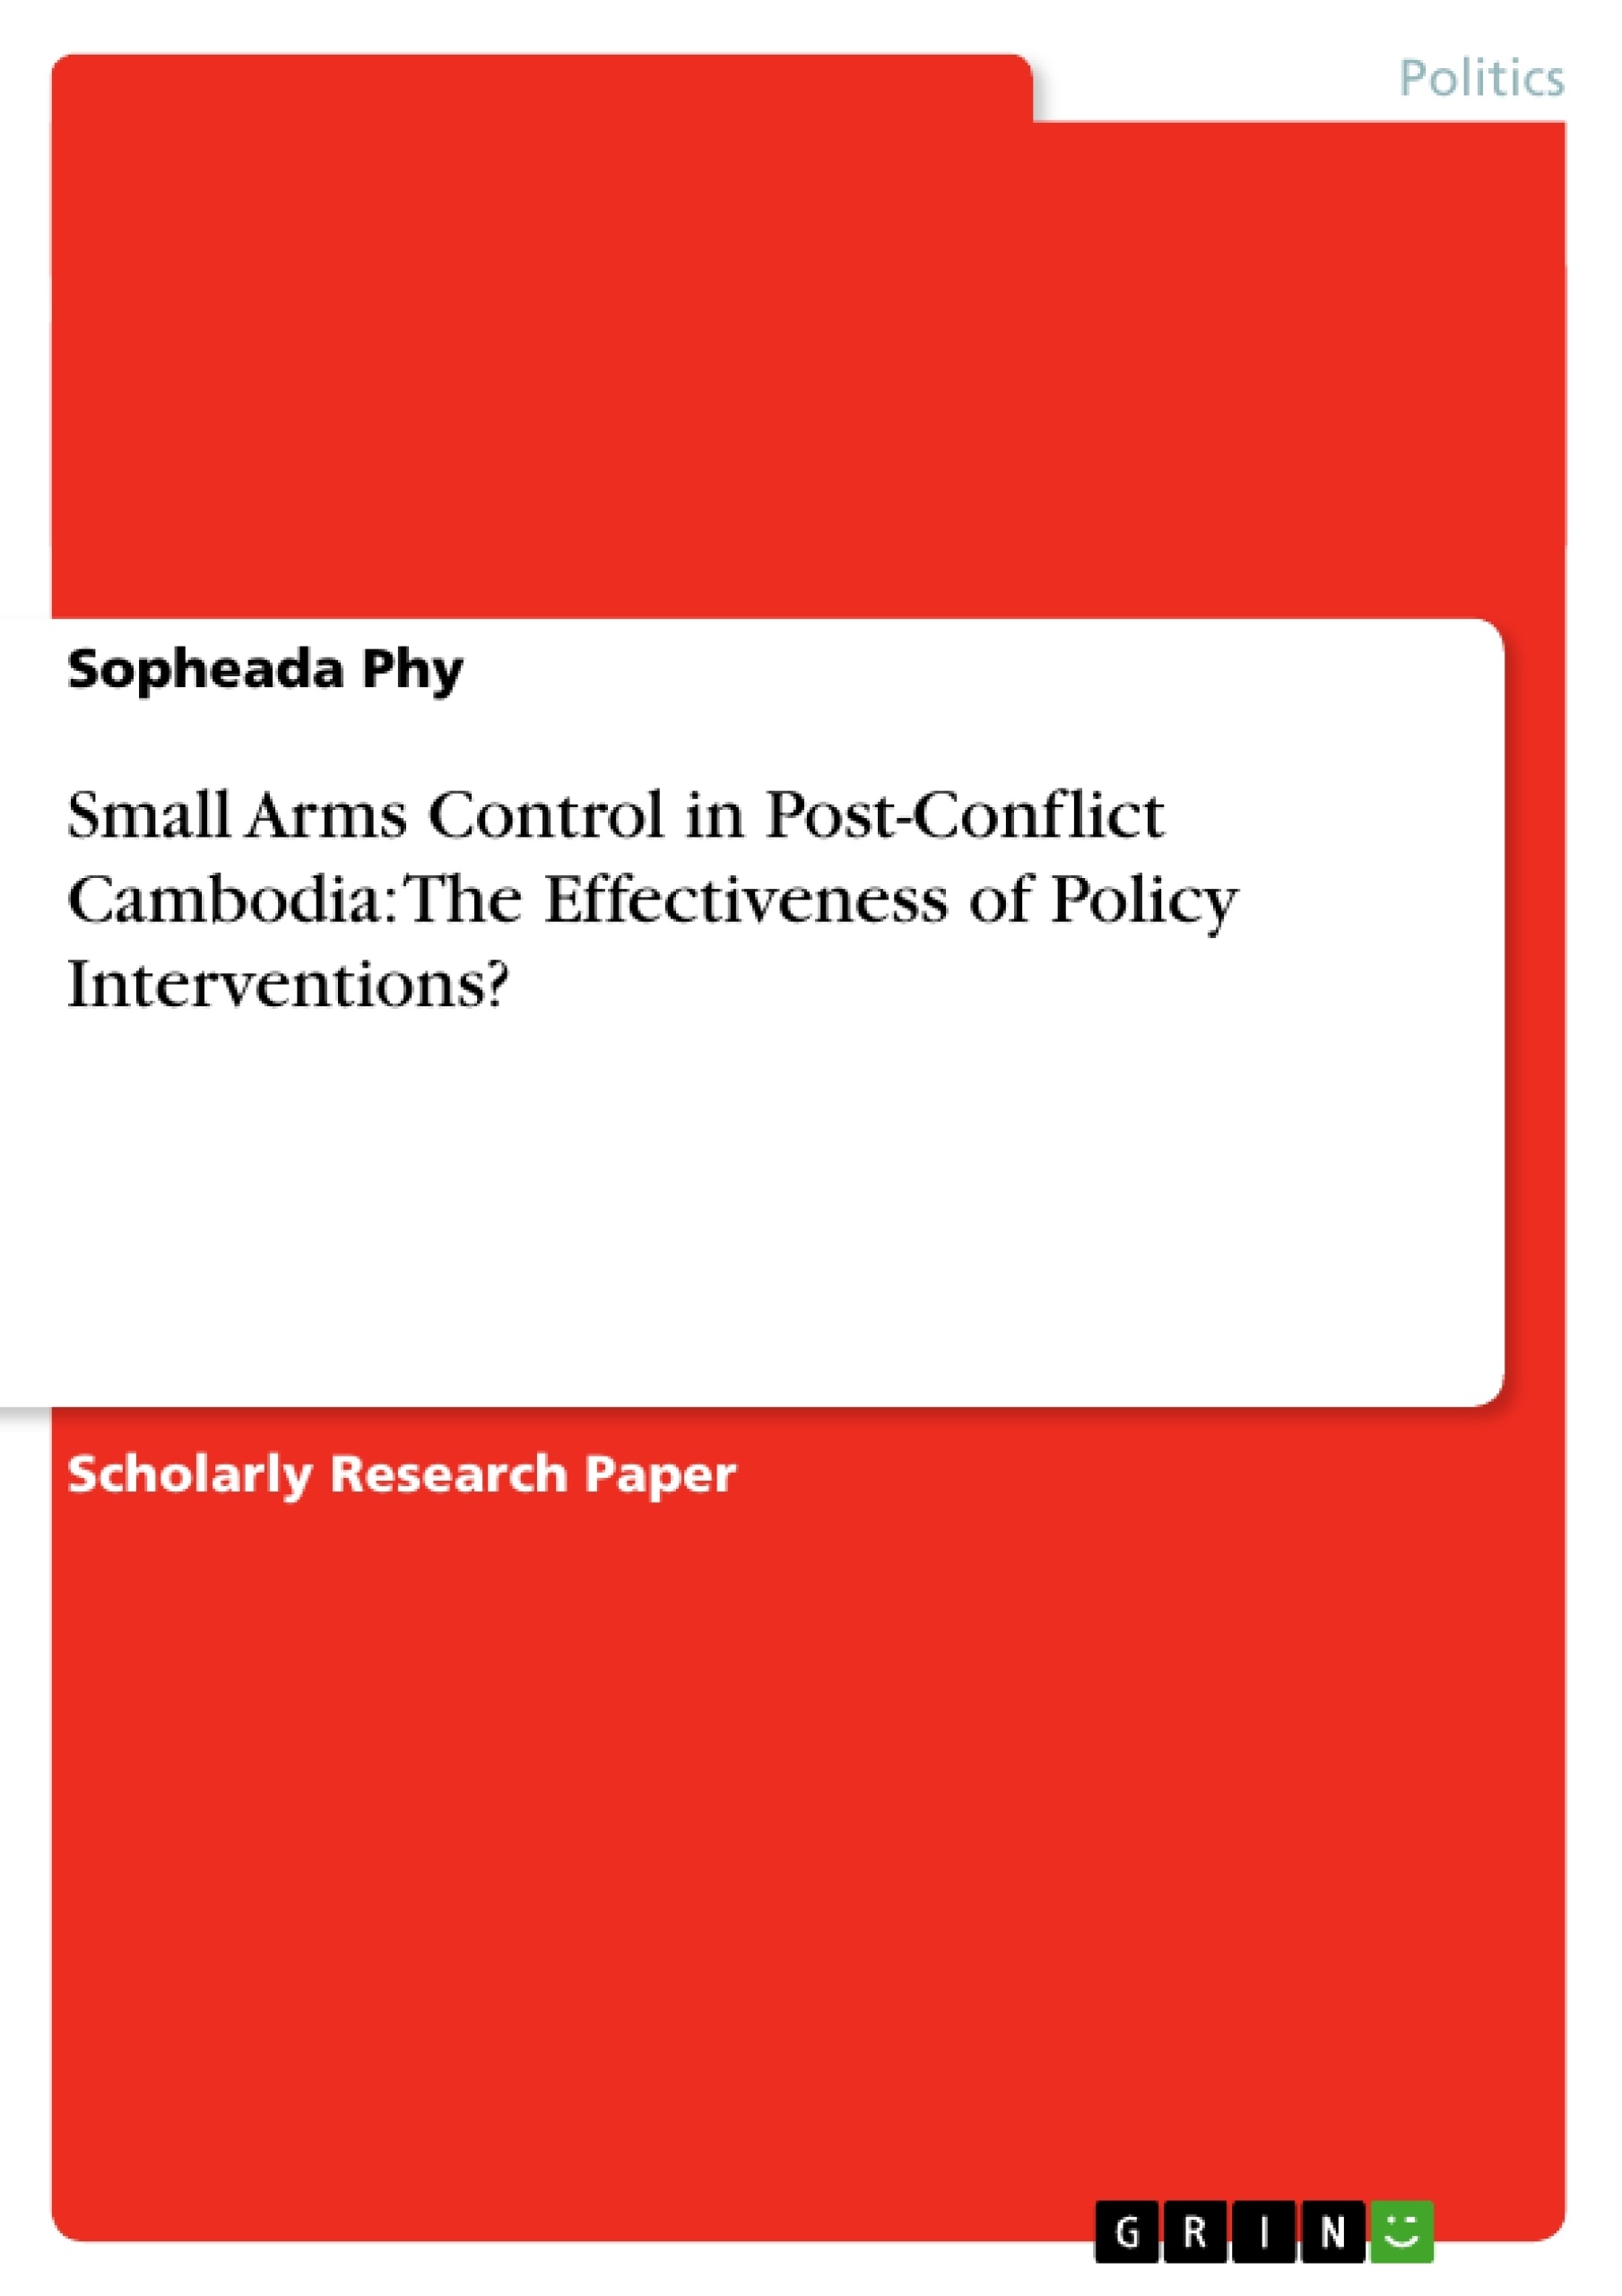 Titre: Small Arms Control in Post-Conflict Cambodia: The Effectiveness of Policy Interventions?